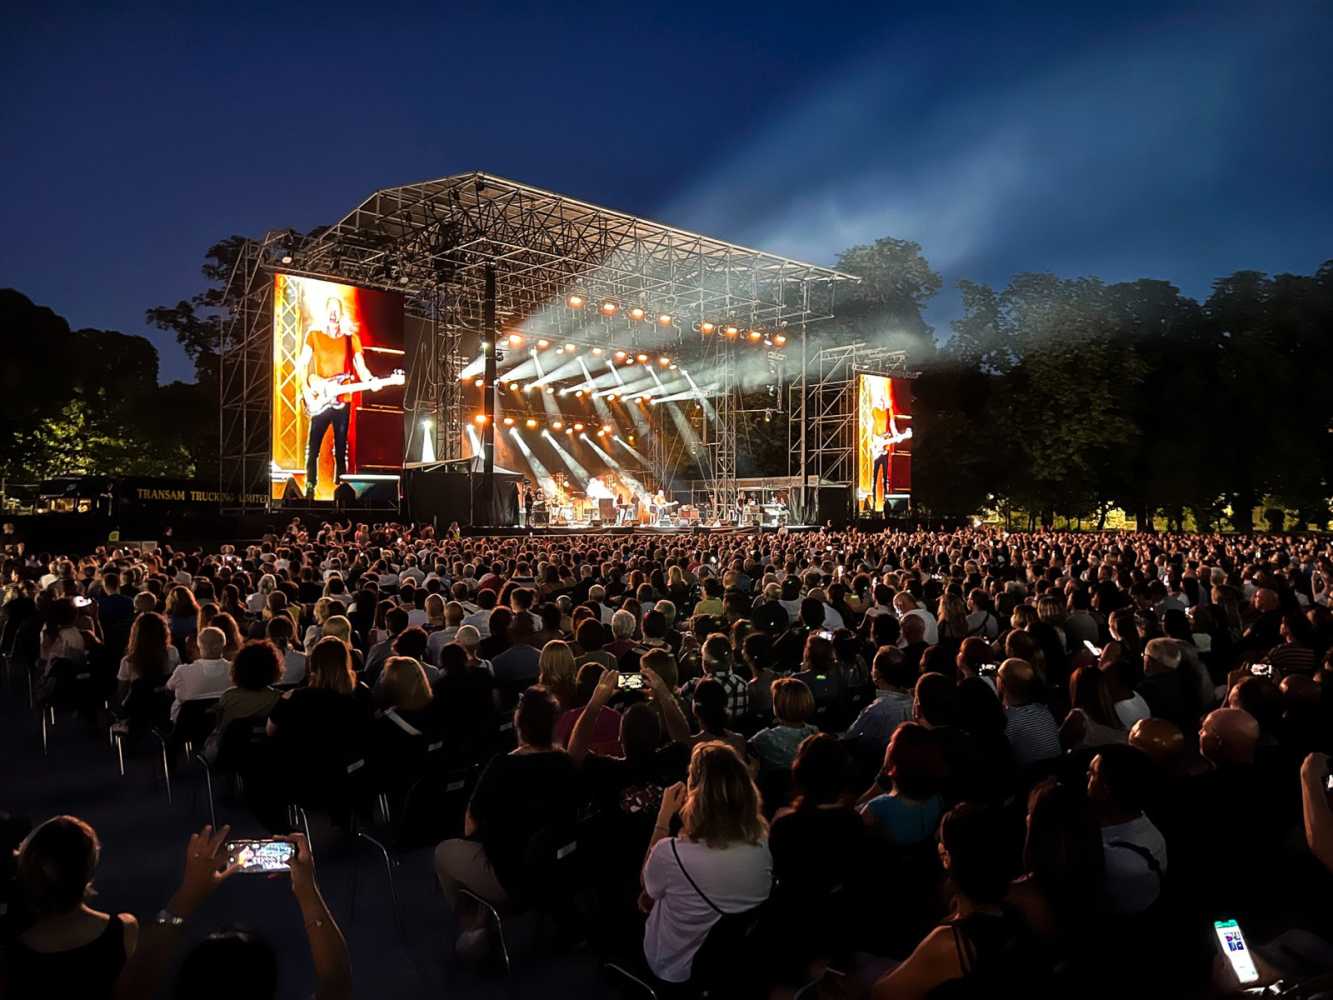 Parma’s Parco Ducale hosted a number of prestigious concerts this summer